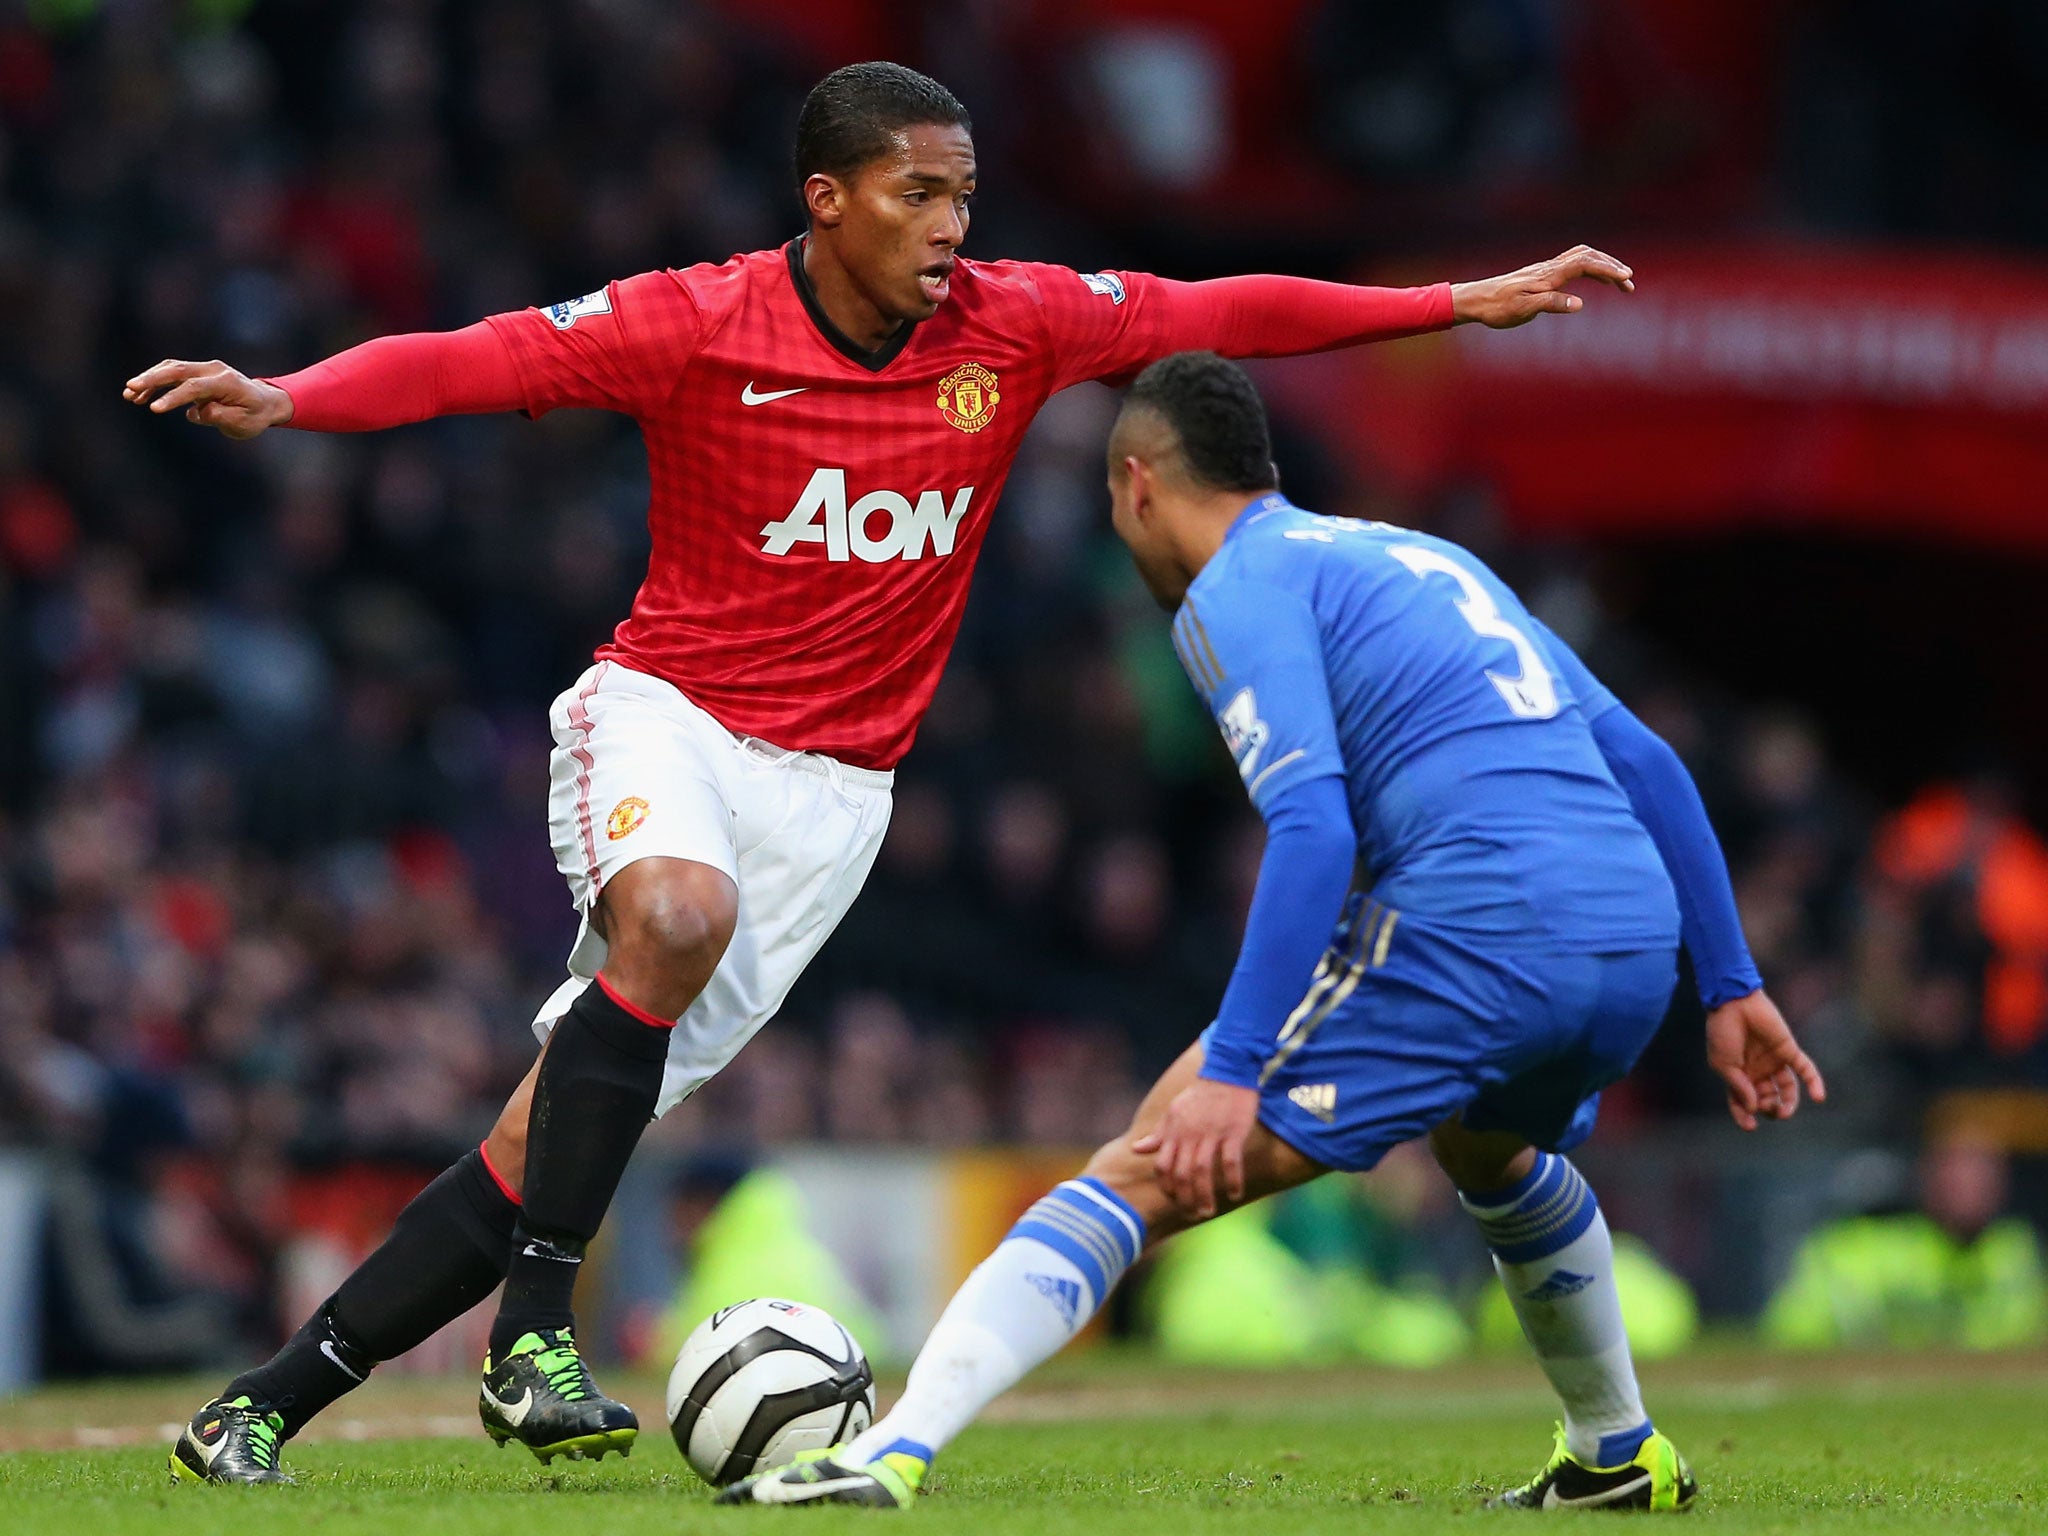 Best off the bench: Antonio Valencia: By no means at his best, last season's bright spark was uninspiring again. 4